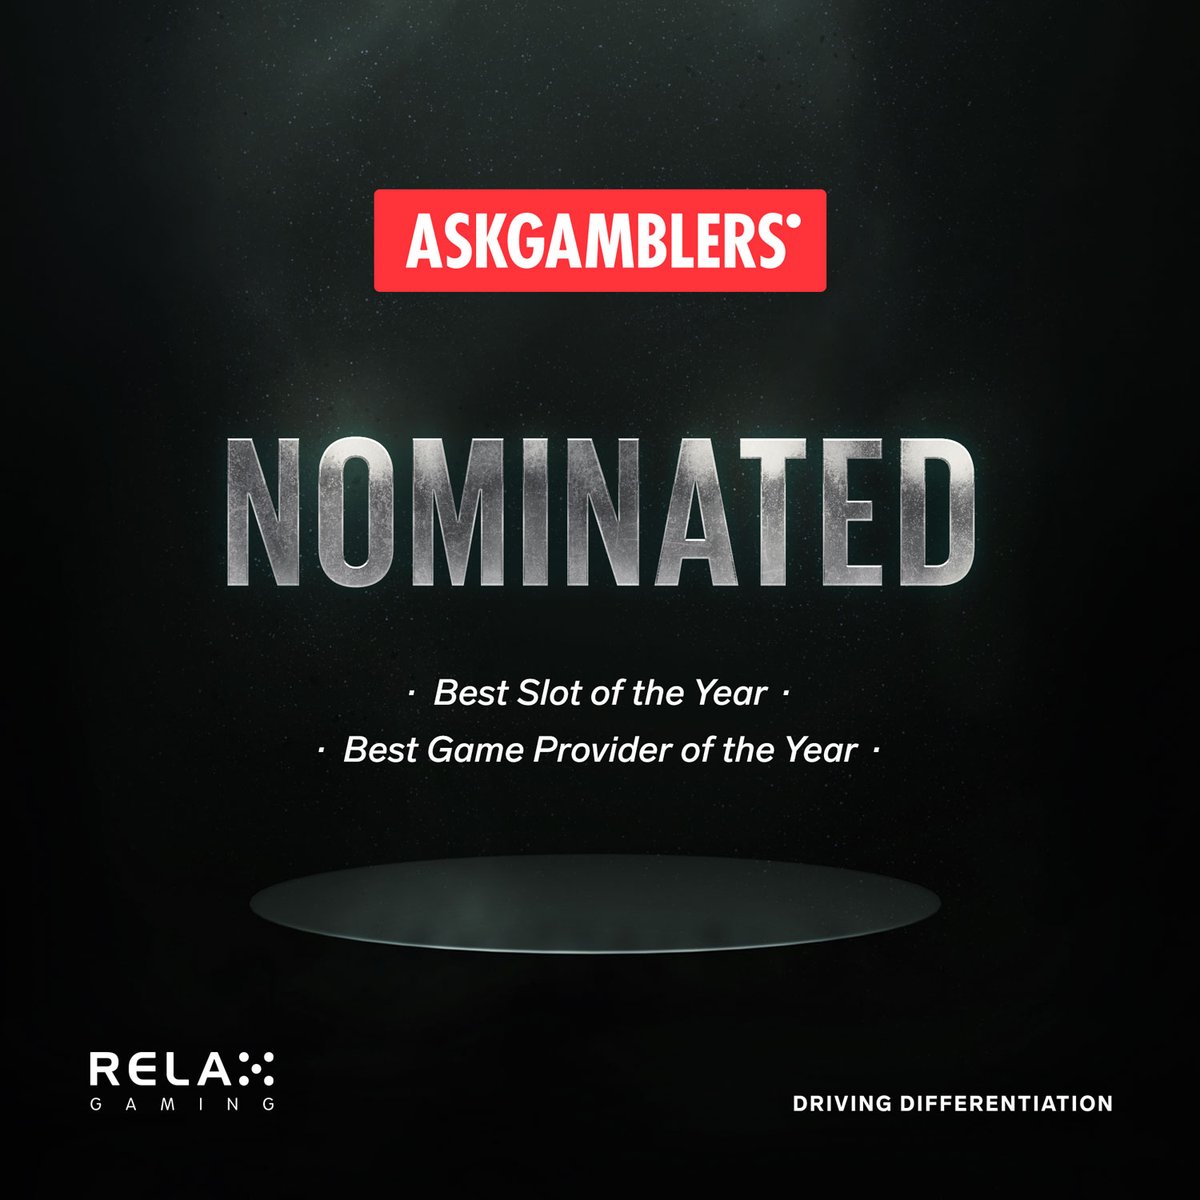 We&#39;re proud to share that Relax Gaming has reached the @AskGamblers Awards Finale! &#127942; &#127881;

The voting stage is now open, and we invite you to click on the link to make your voice heard and decide the winners: 

